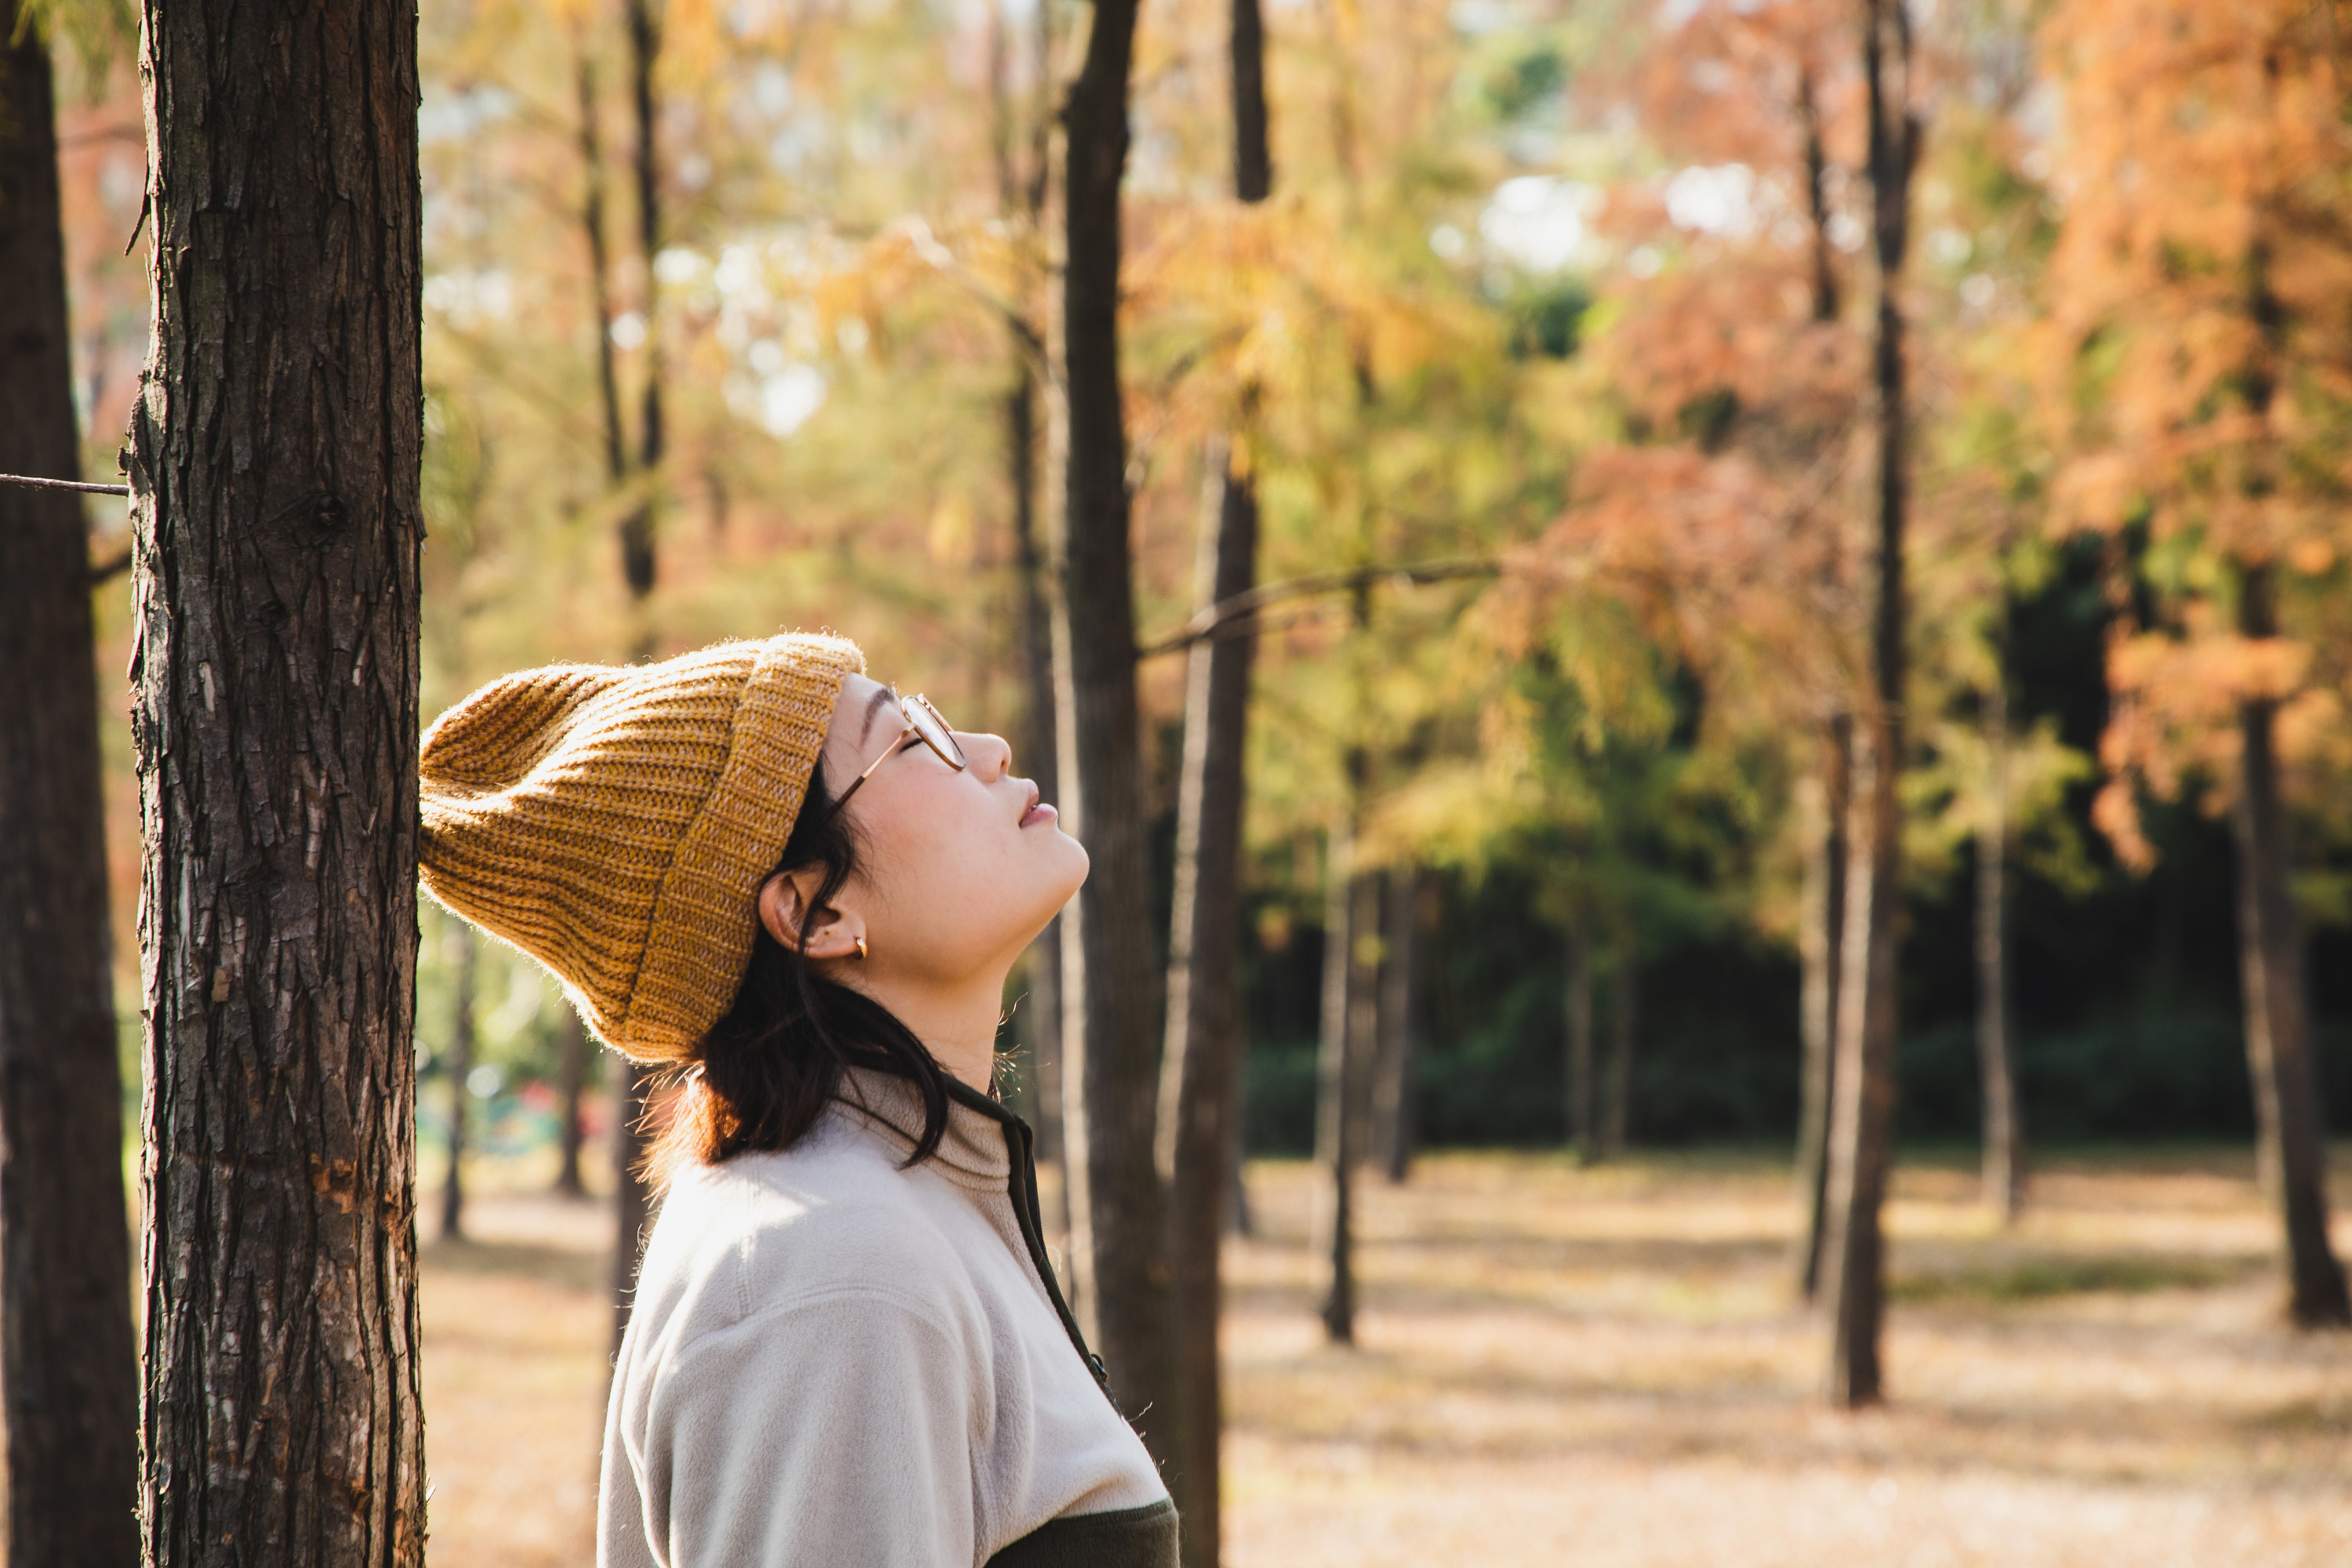 A person with a yellow beanie, glasses, earrings, and a jacket breathing in the air surrounded by fall trees